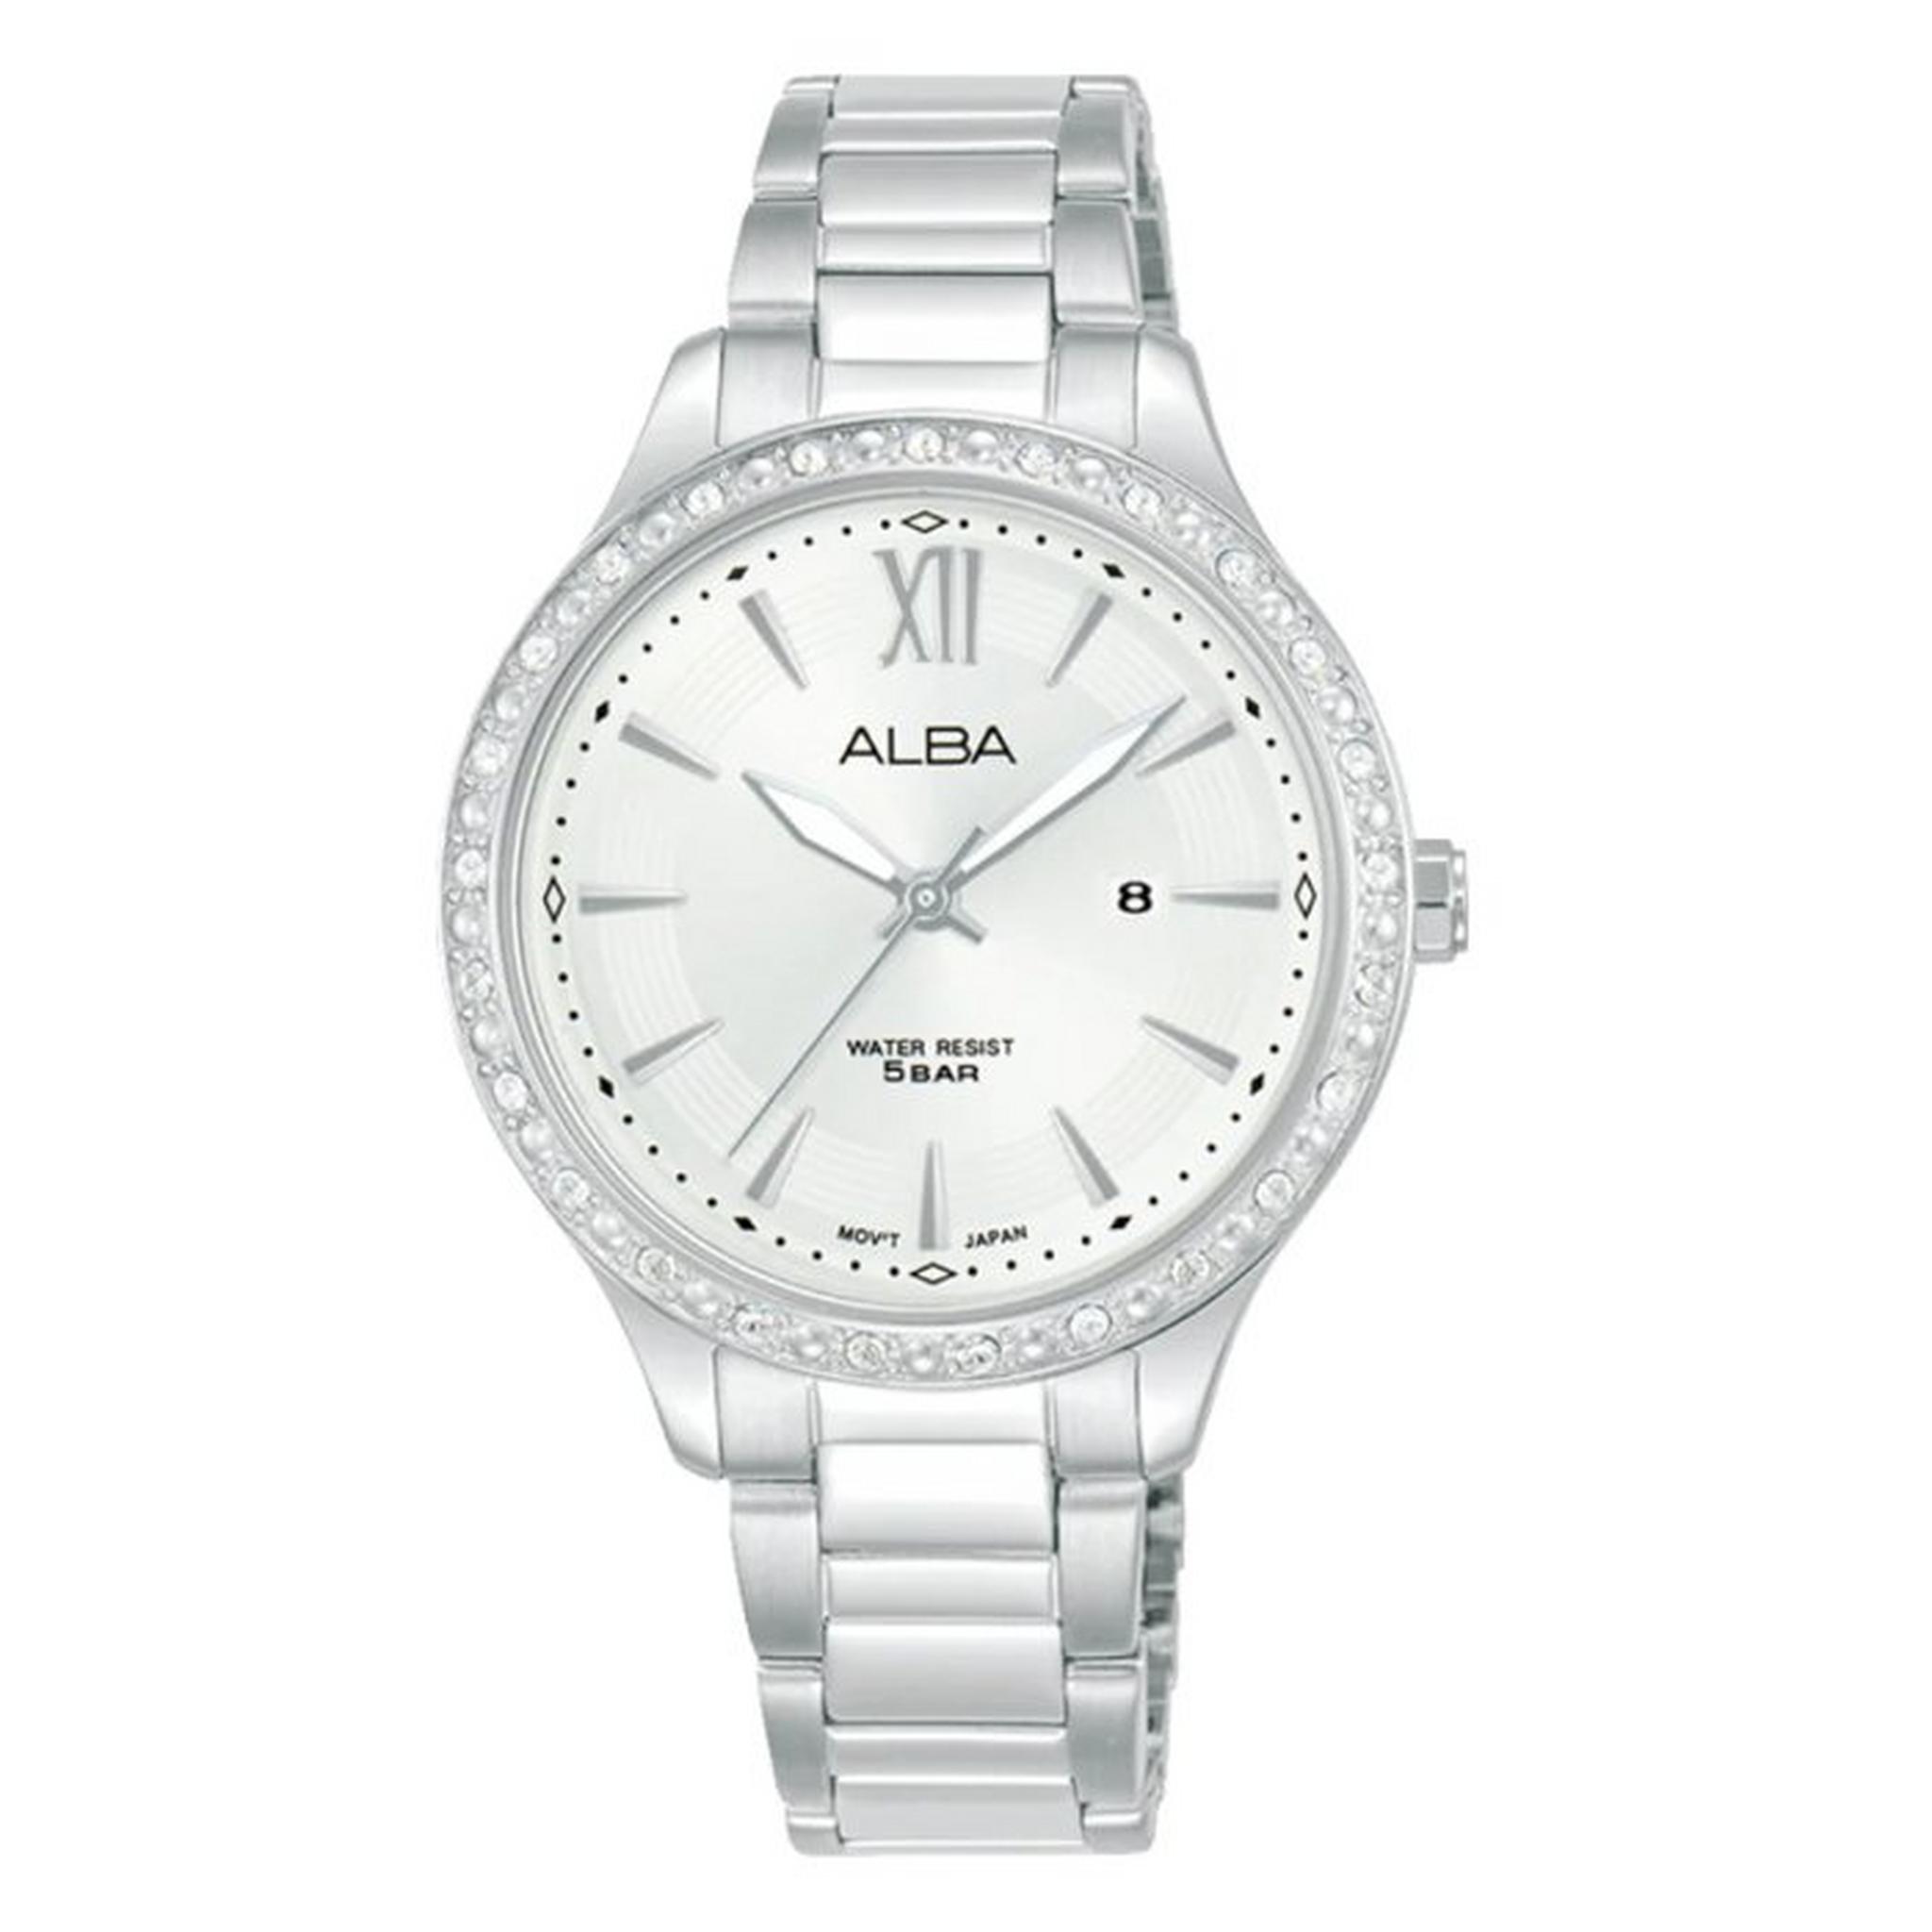 Alba Fashion Ladies Watch, Analog, 33mm, Stainless Steel Strap, AH7BY1X1 - Silver